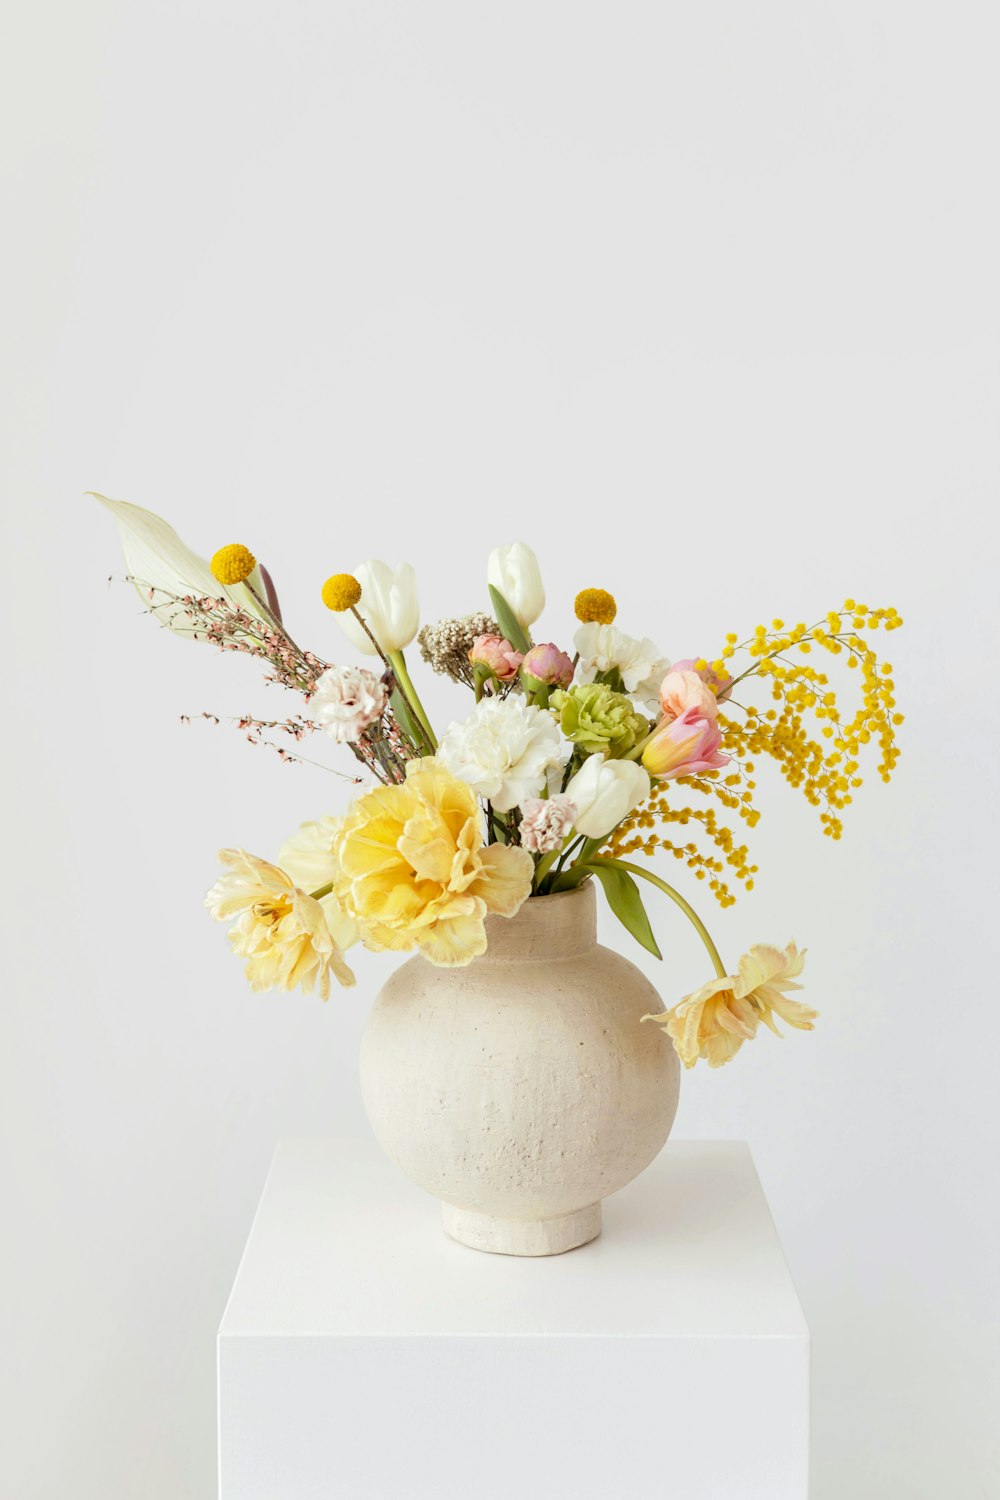 a white vase with yellow and white flowers in it